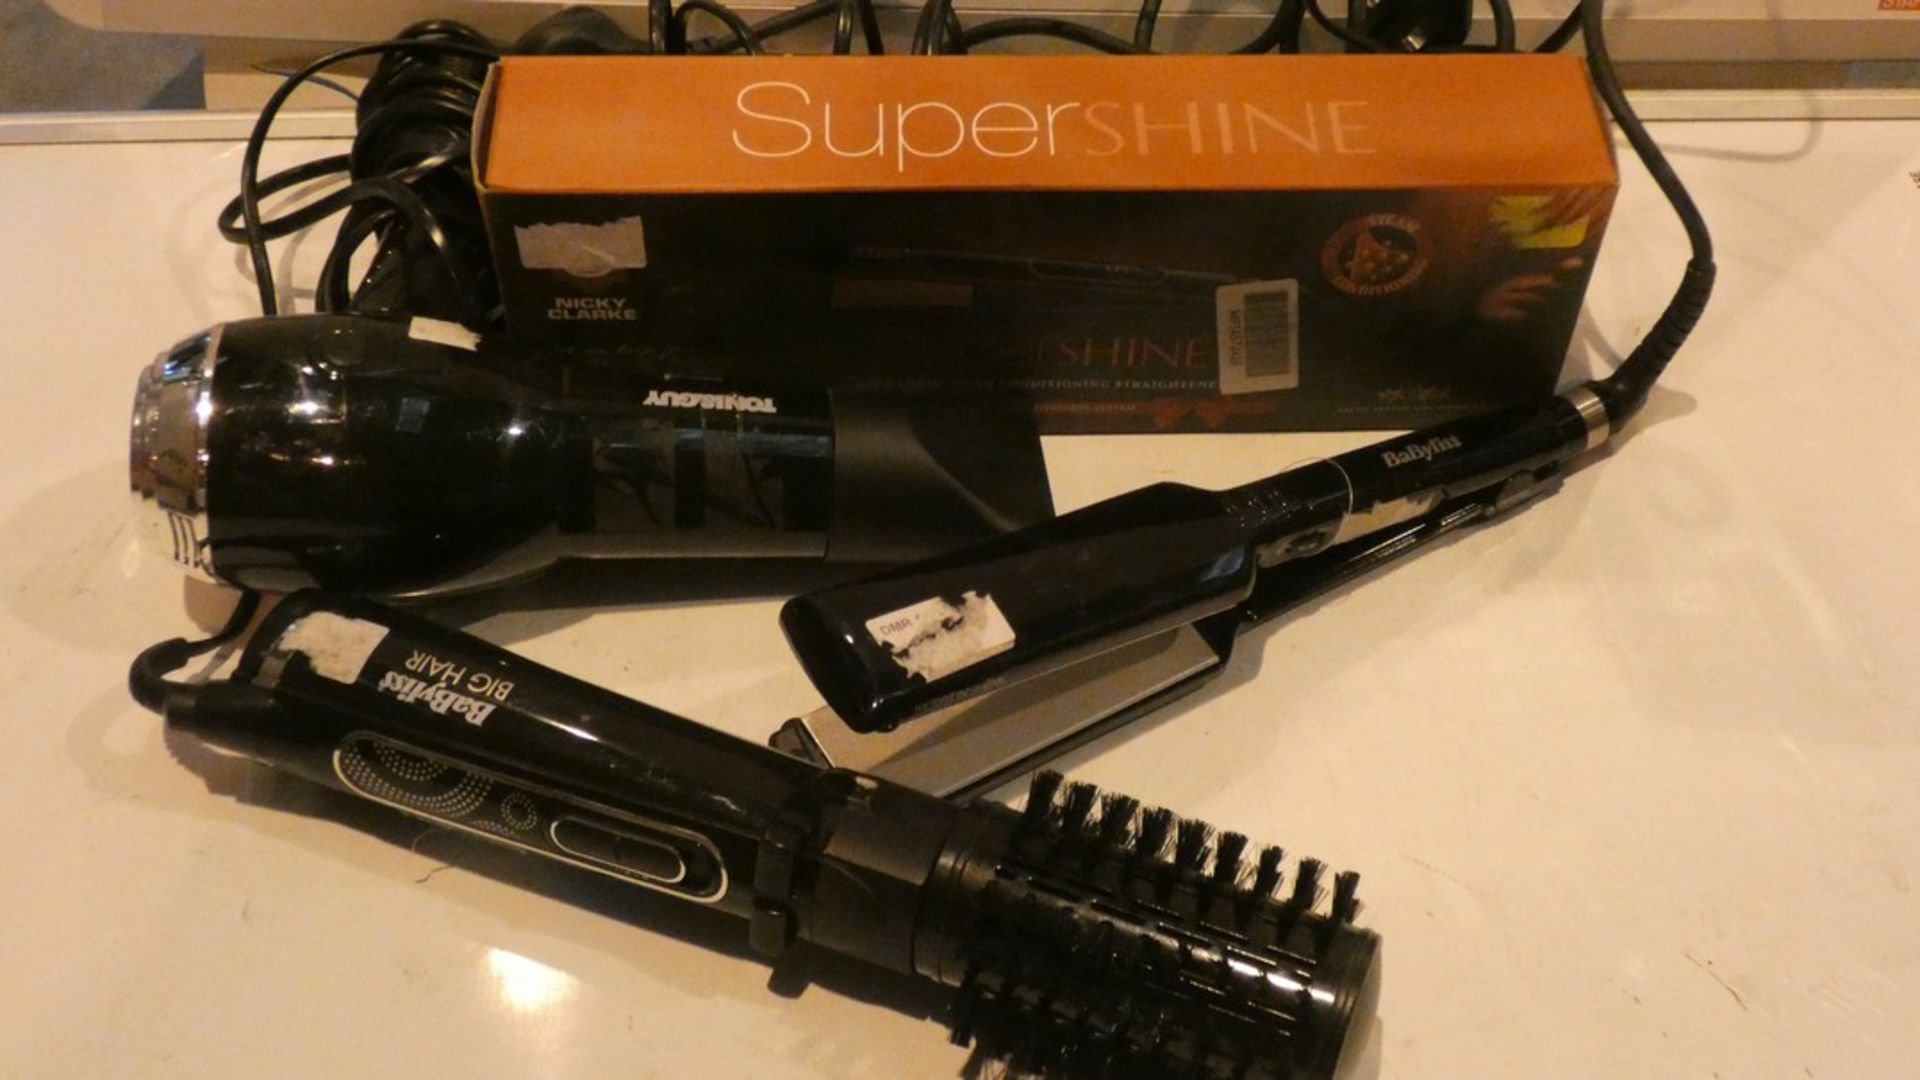 Lot to Contain 15 Assorted Hair Care Products to Include 8 Hair Dryers by Glamoriser, Revlon,